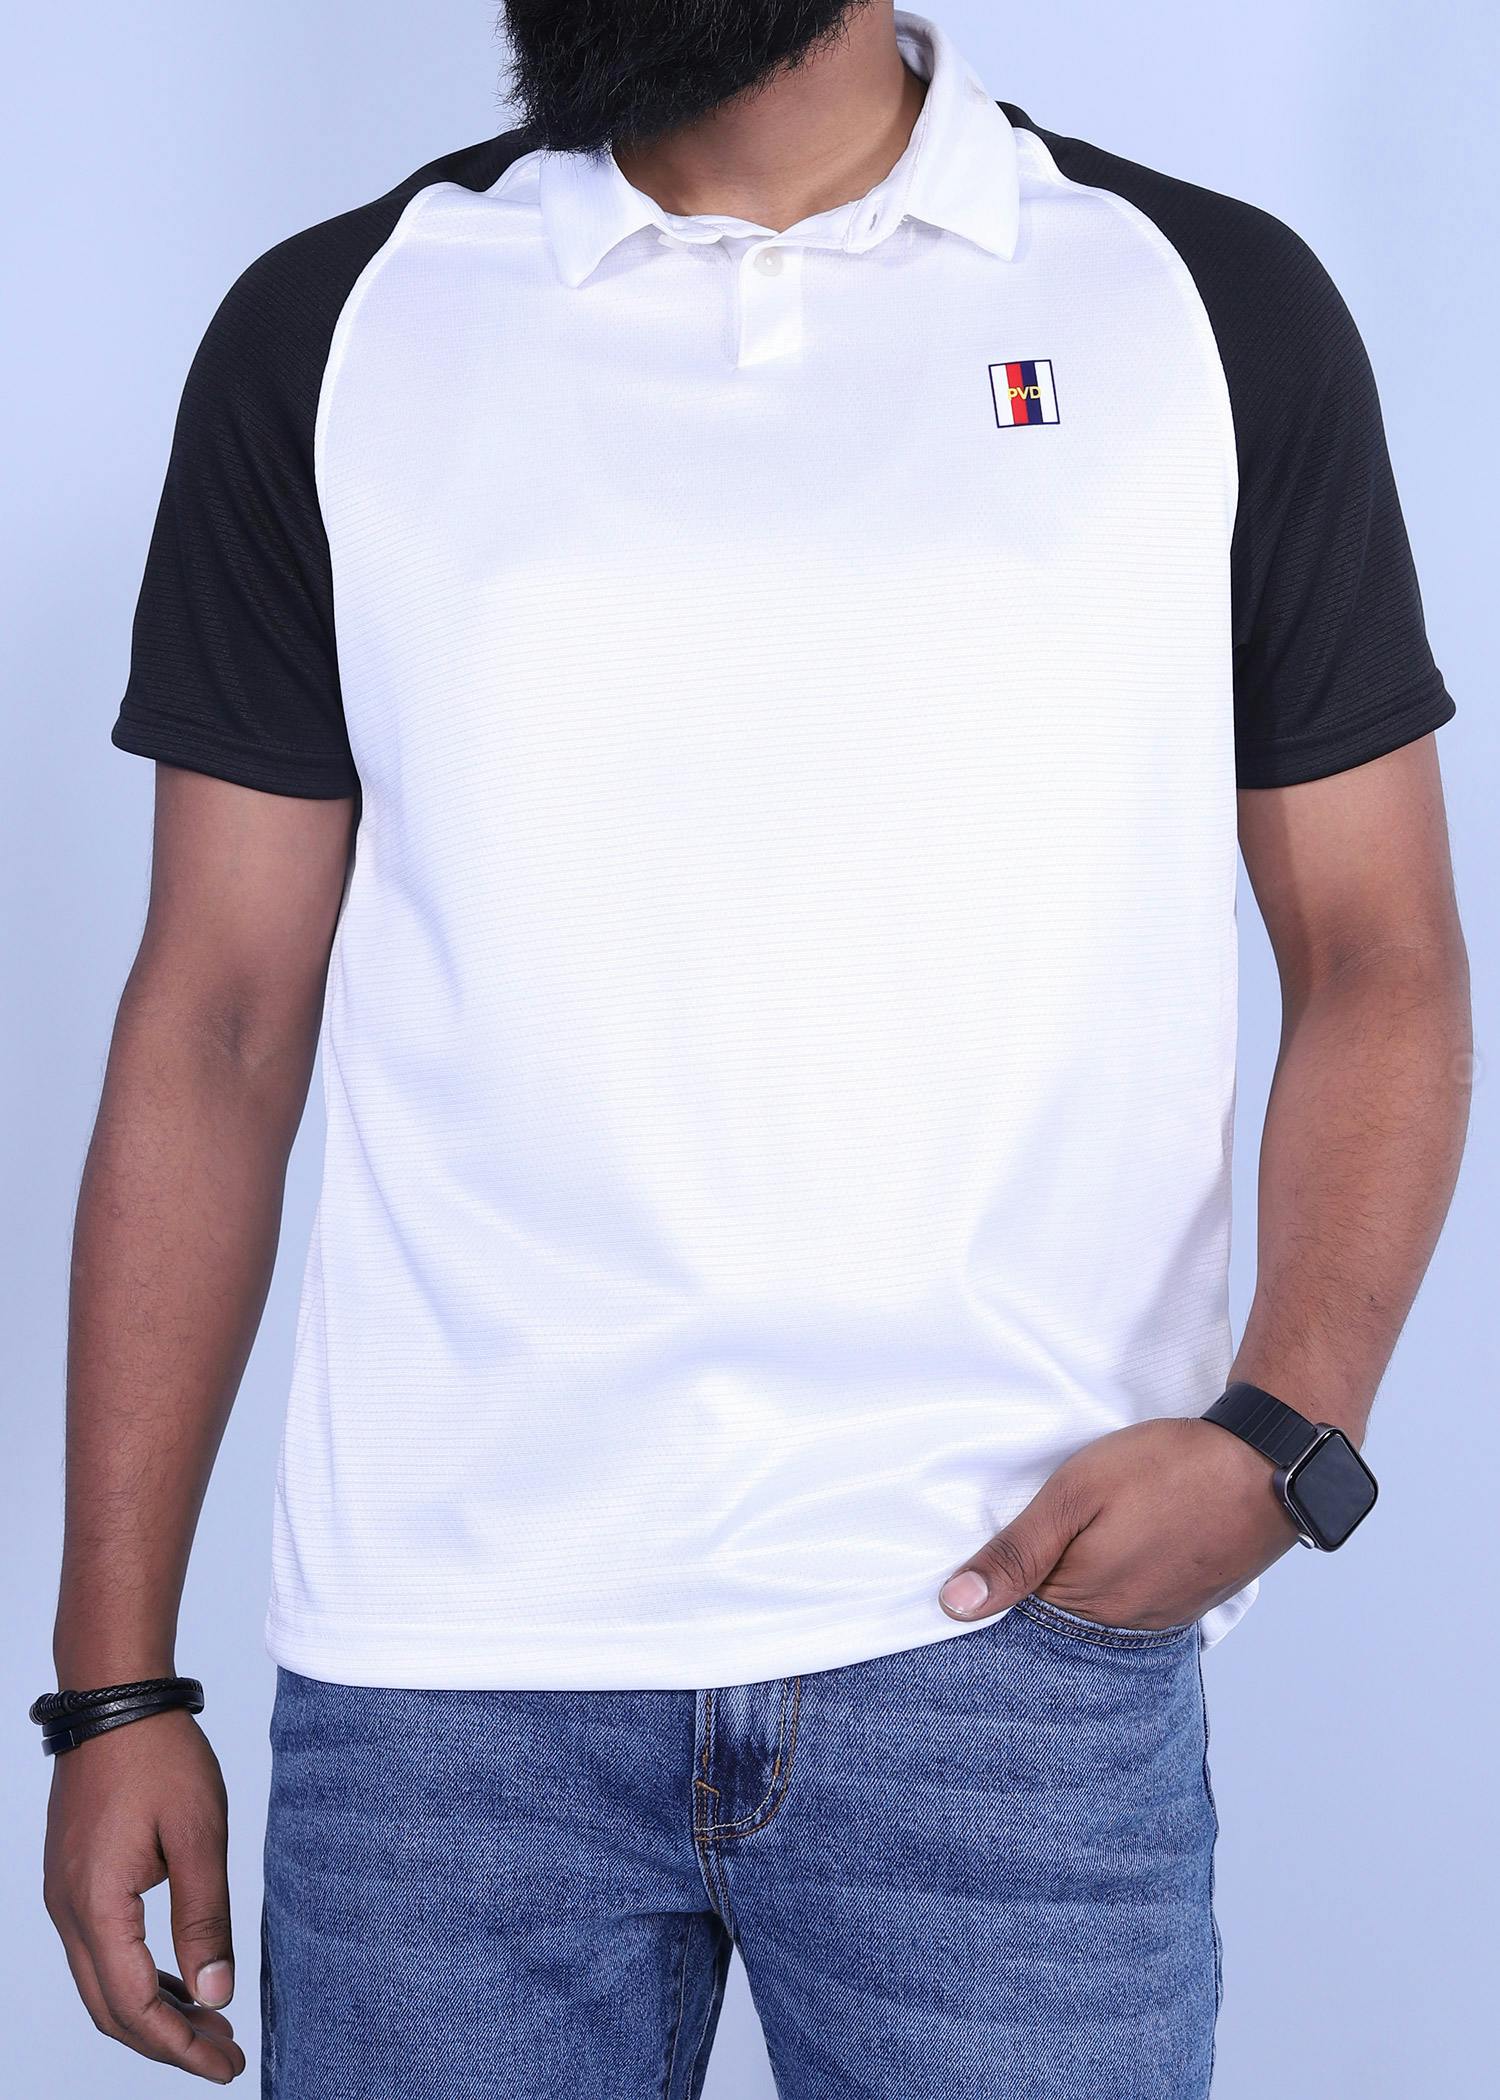 holfman polo white black color half front view